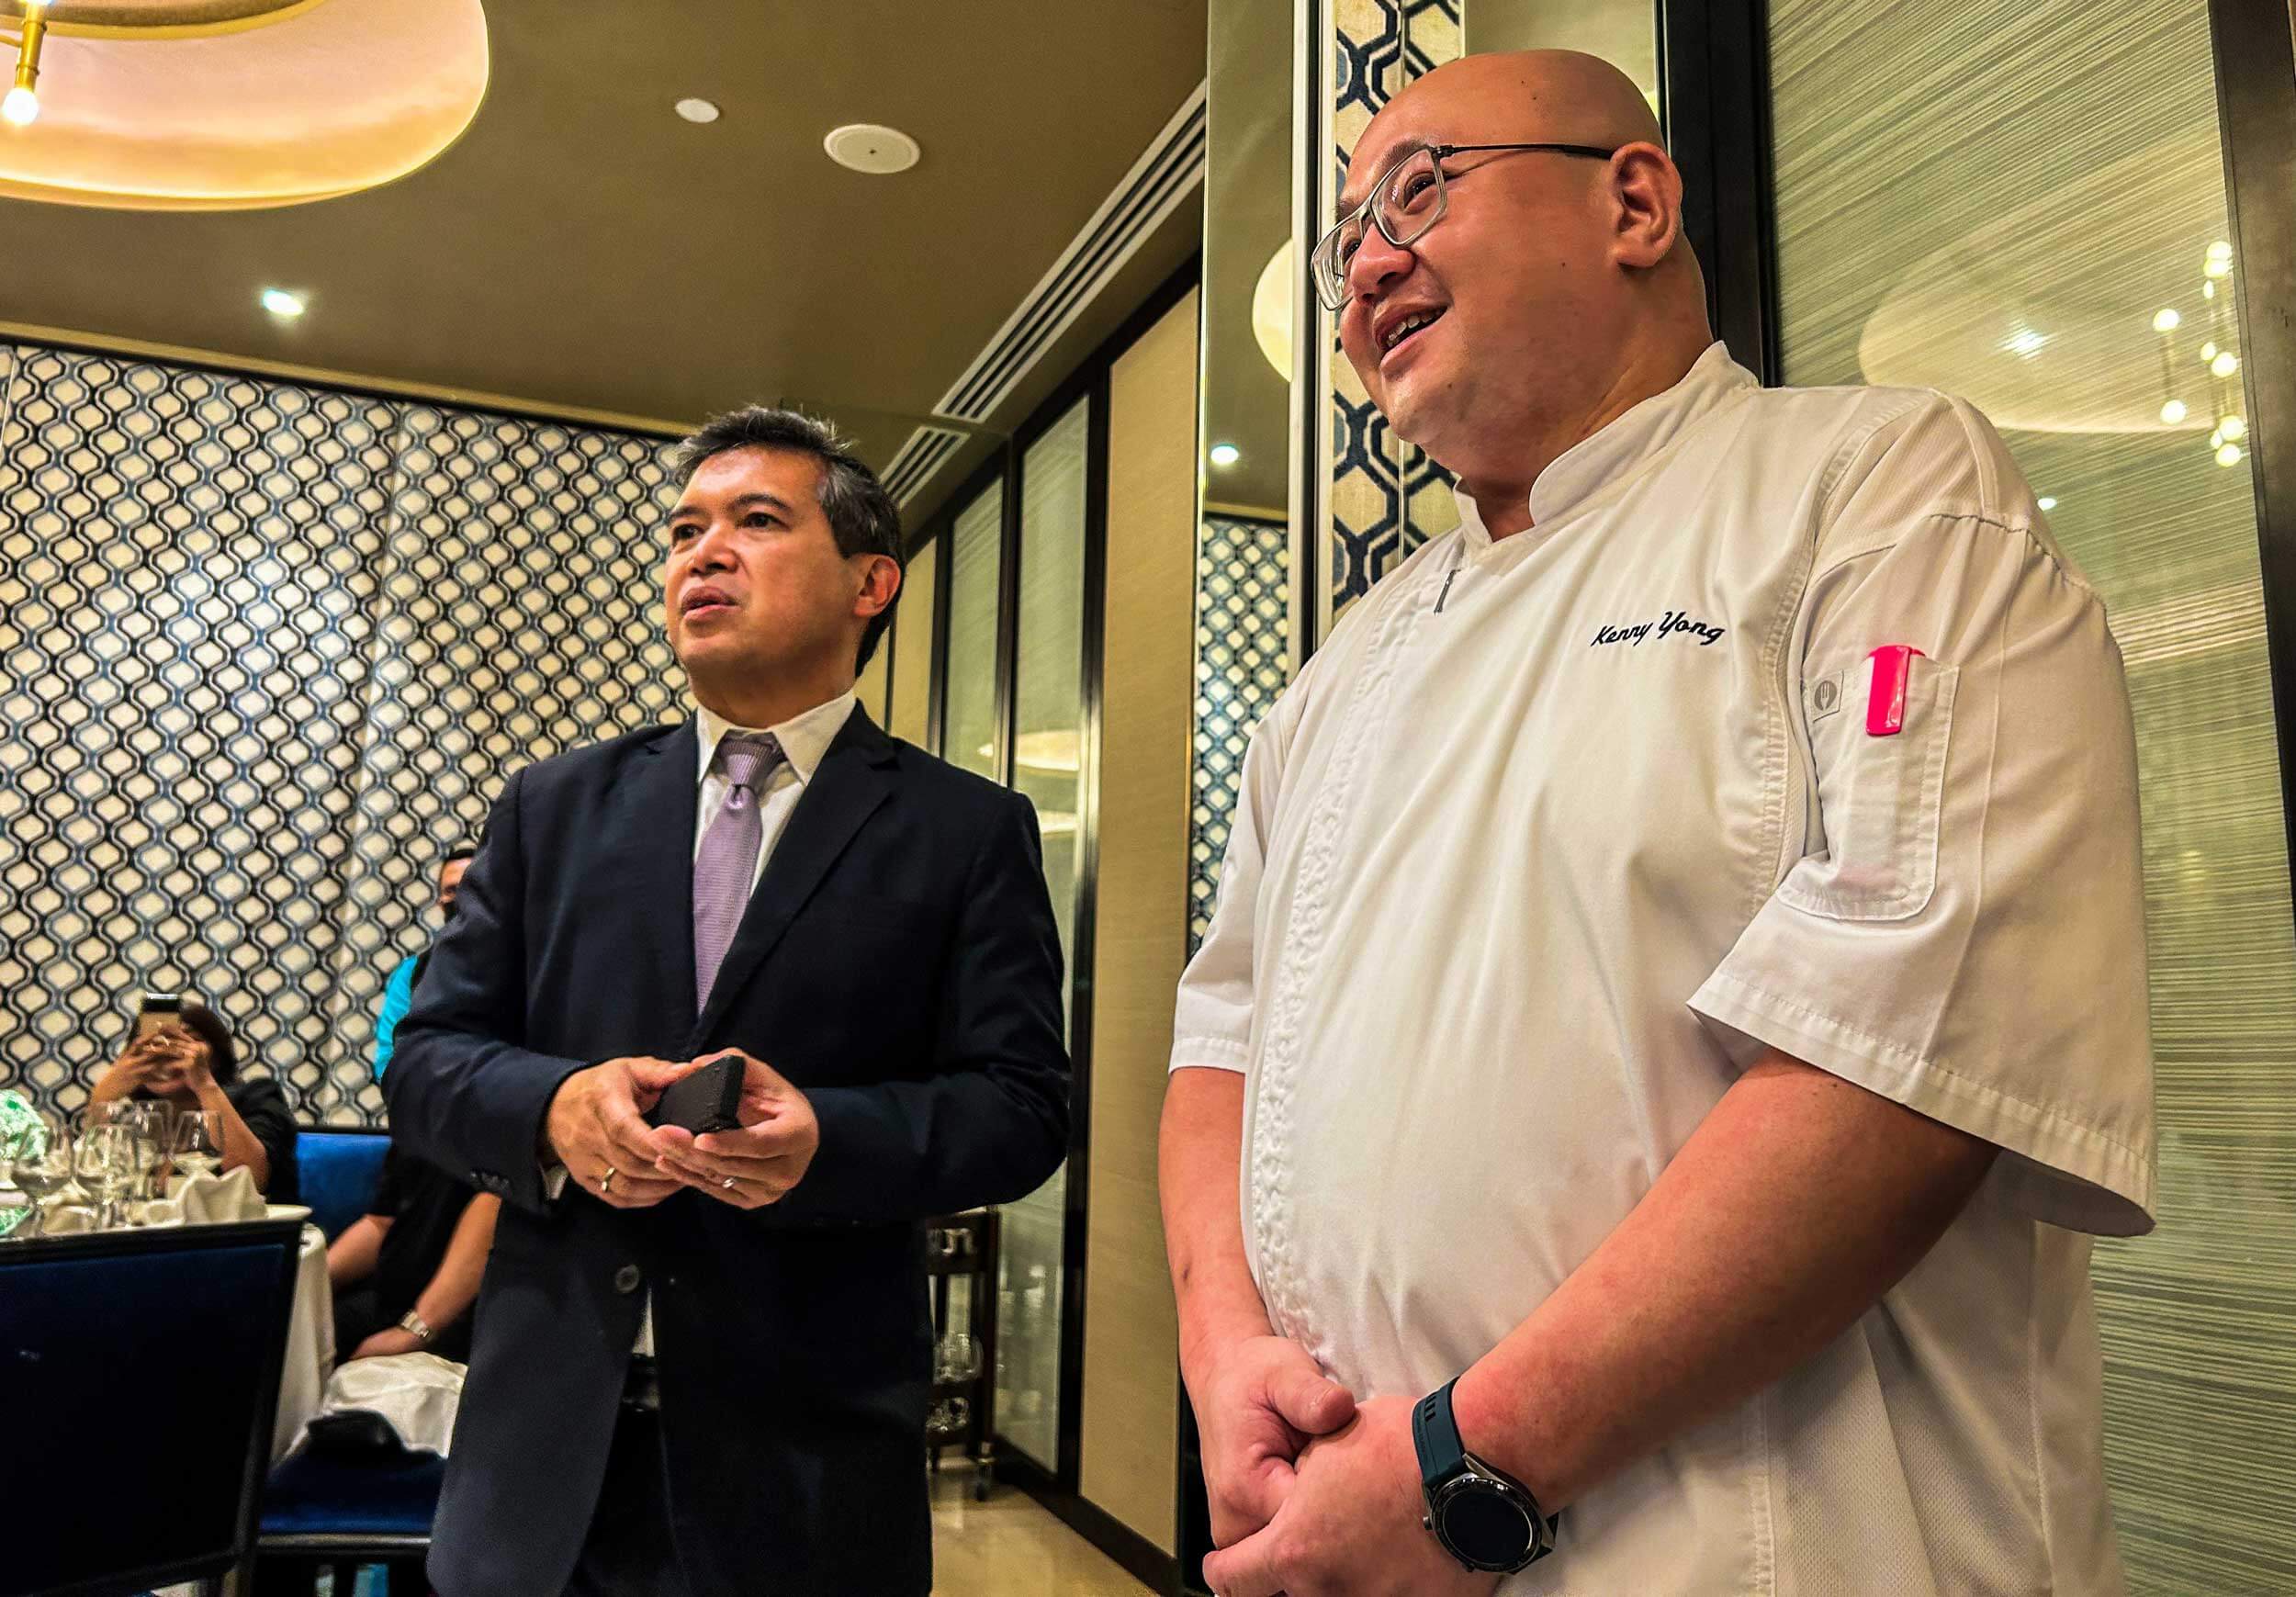 Marco Polo Plaza Cebu General Manager Roel Constantino (left) introduces Chef Kenny Yong Tze Hin as the new Hai Shin Lou chef.